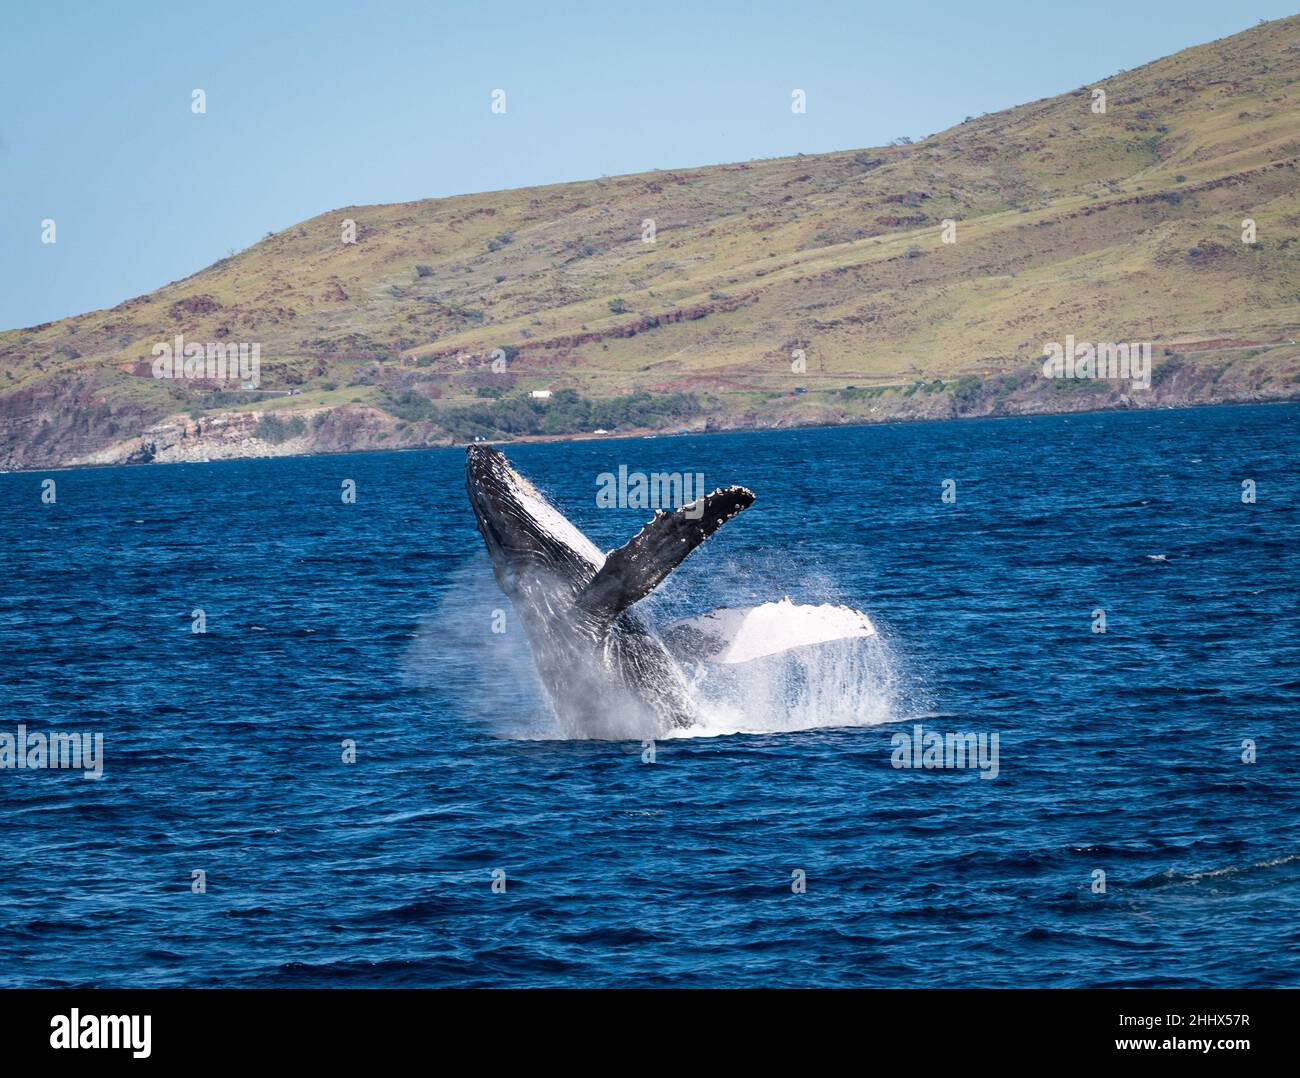 Photo of a humpback whale breaching out of the water off the coast of West Maui, Hawaii, in the U.S. during whale watching season. Stock Photo